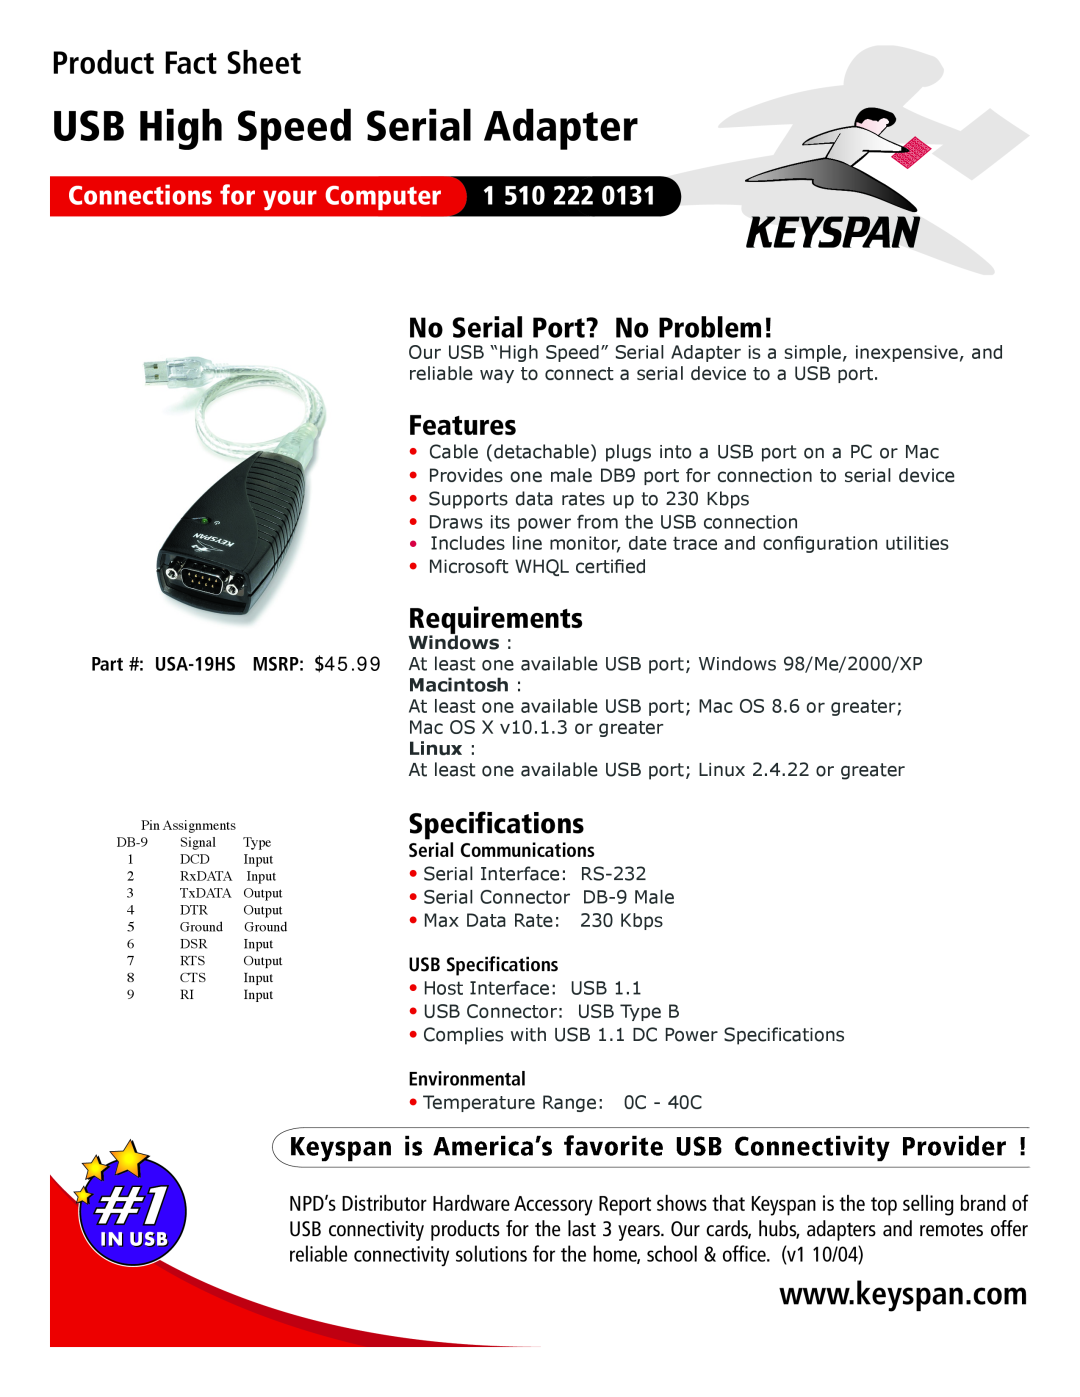 Keyspan USA-19HS specifications USB High Speed Serial Adapter, Product Fact Sheet, No Serial Port? No Problem, Features 